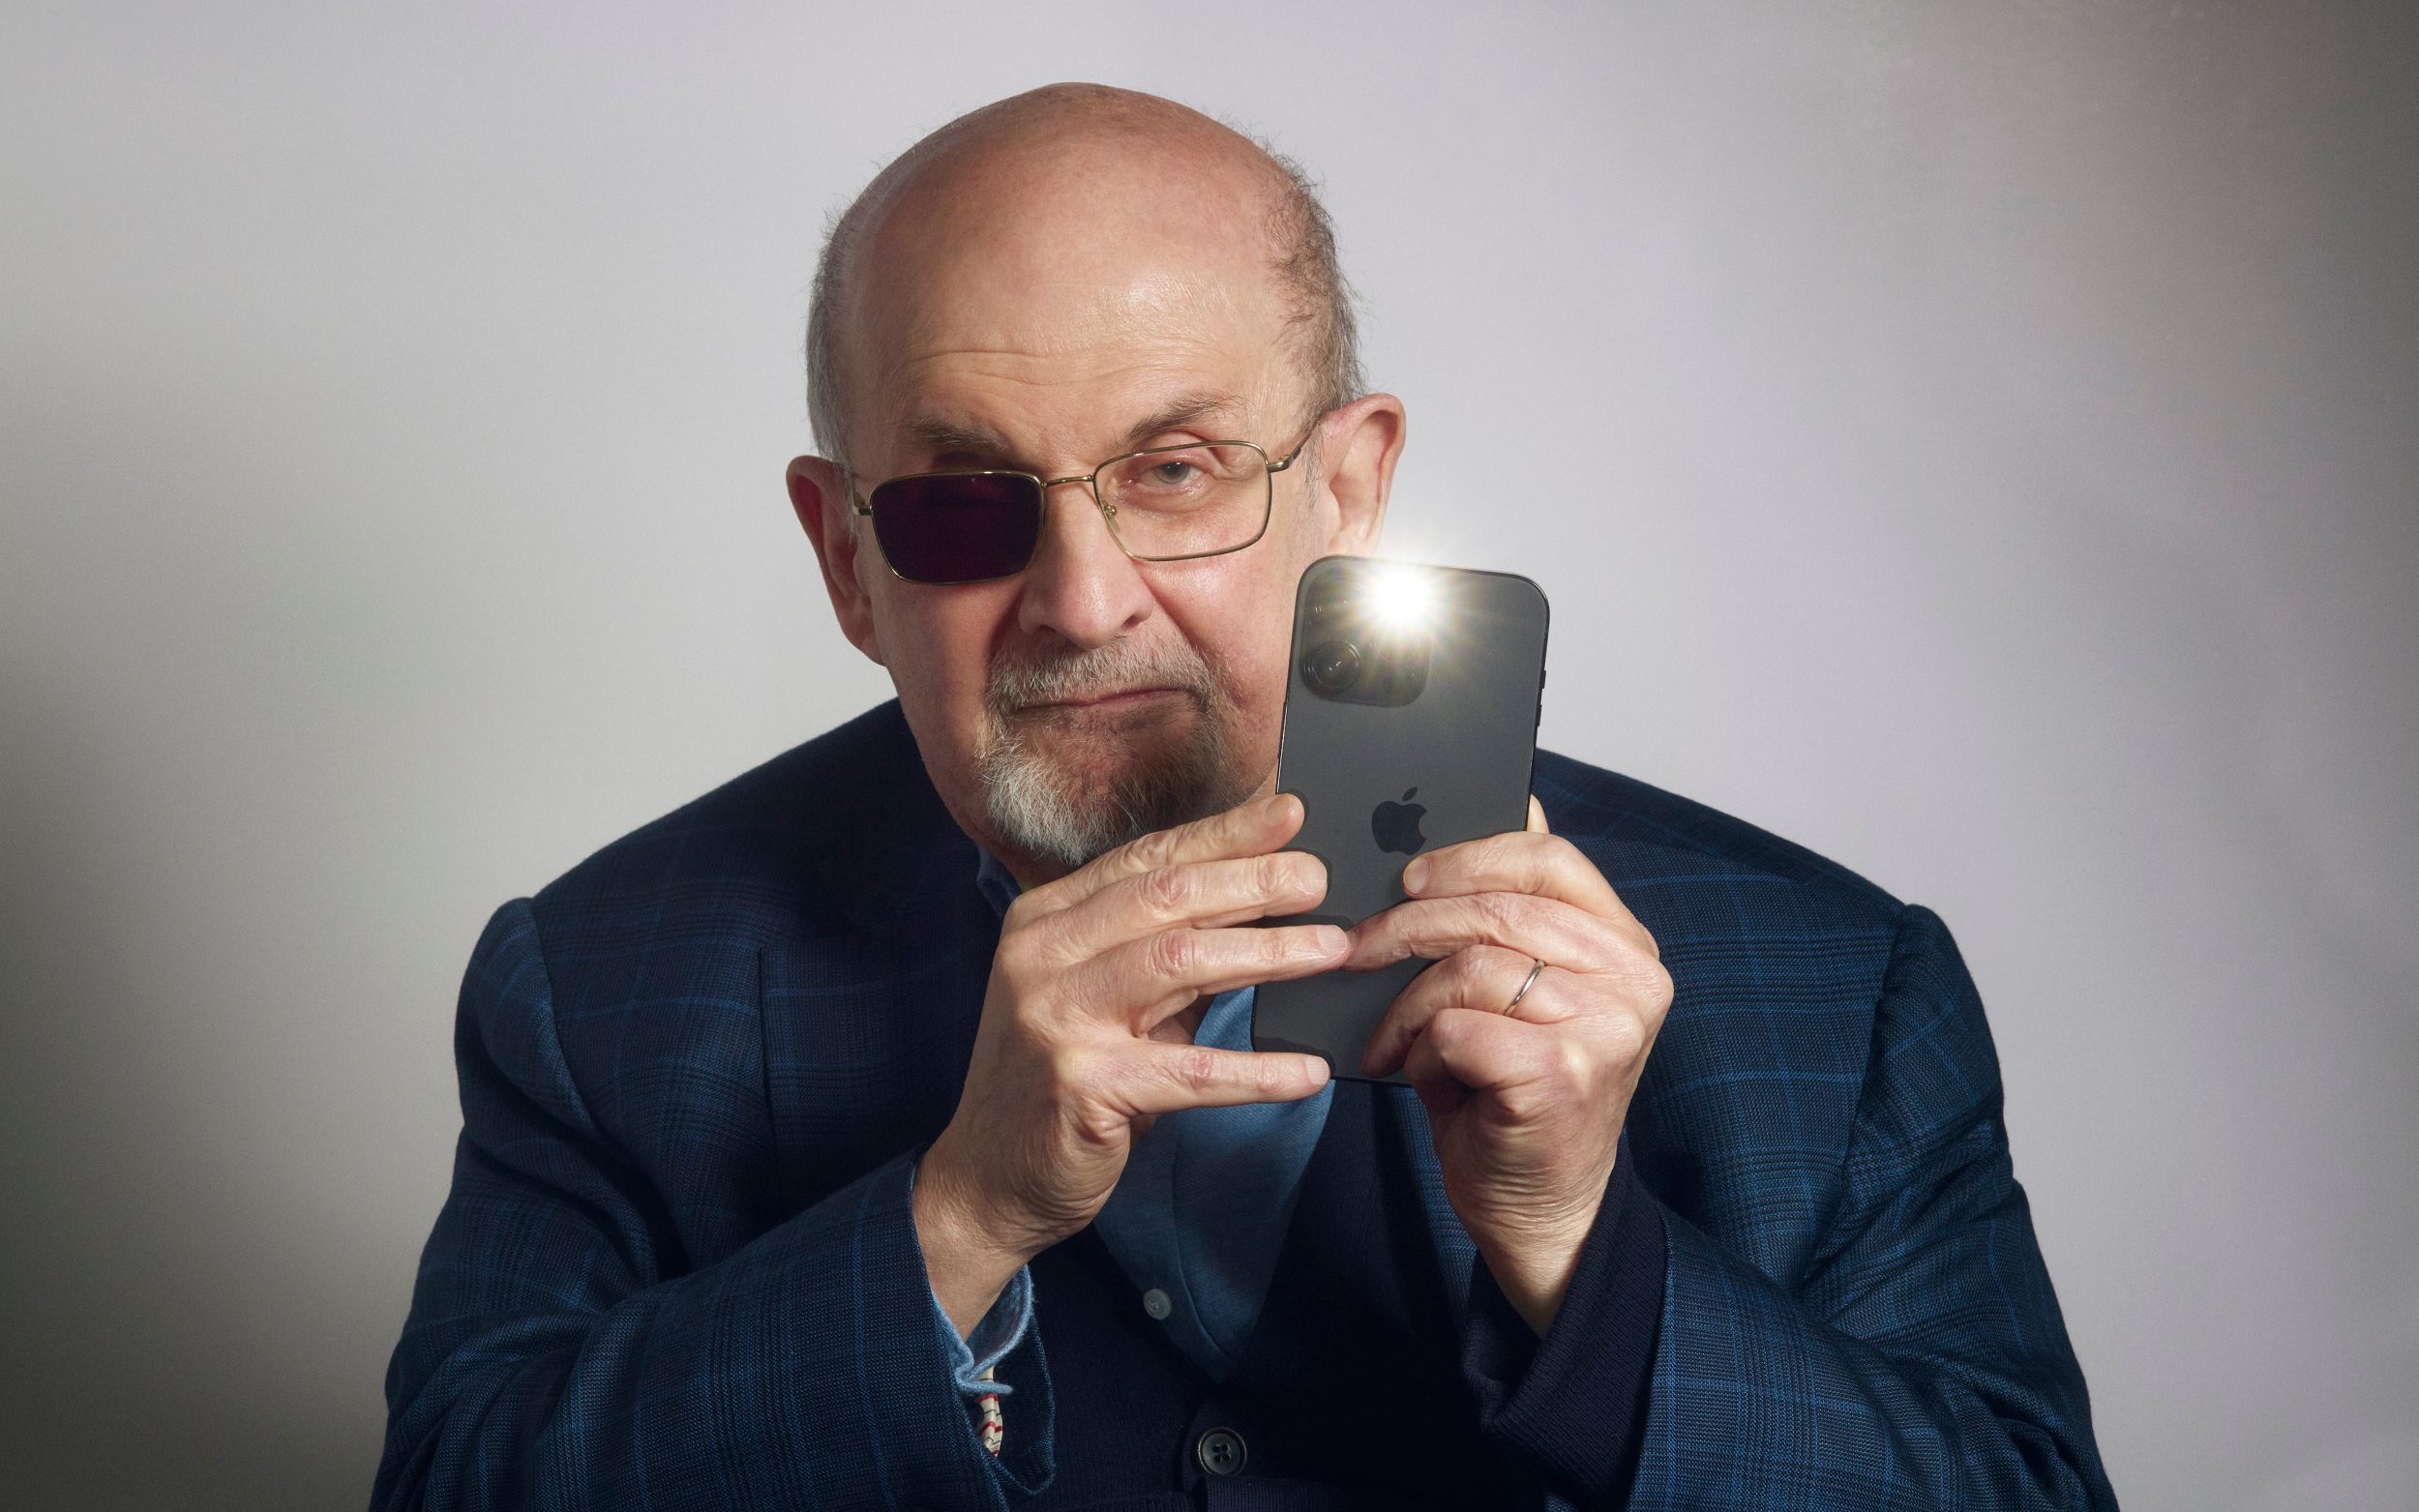 ‘we are in danger of becoming too thin-skinned’: salman rushdie answers telegraph reader questions